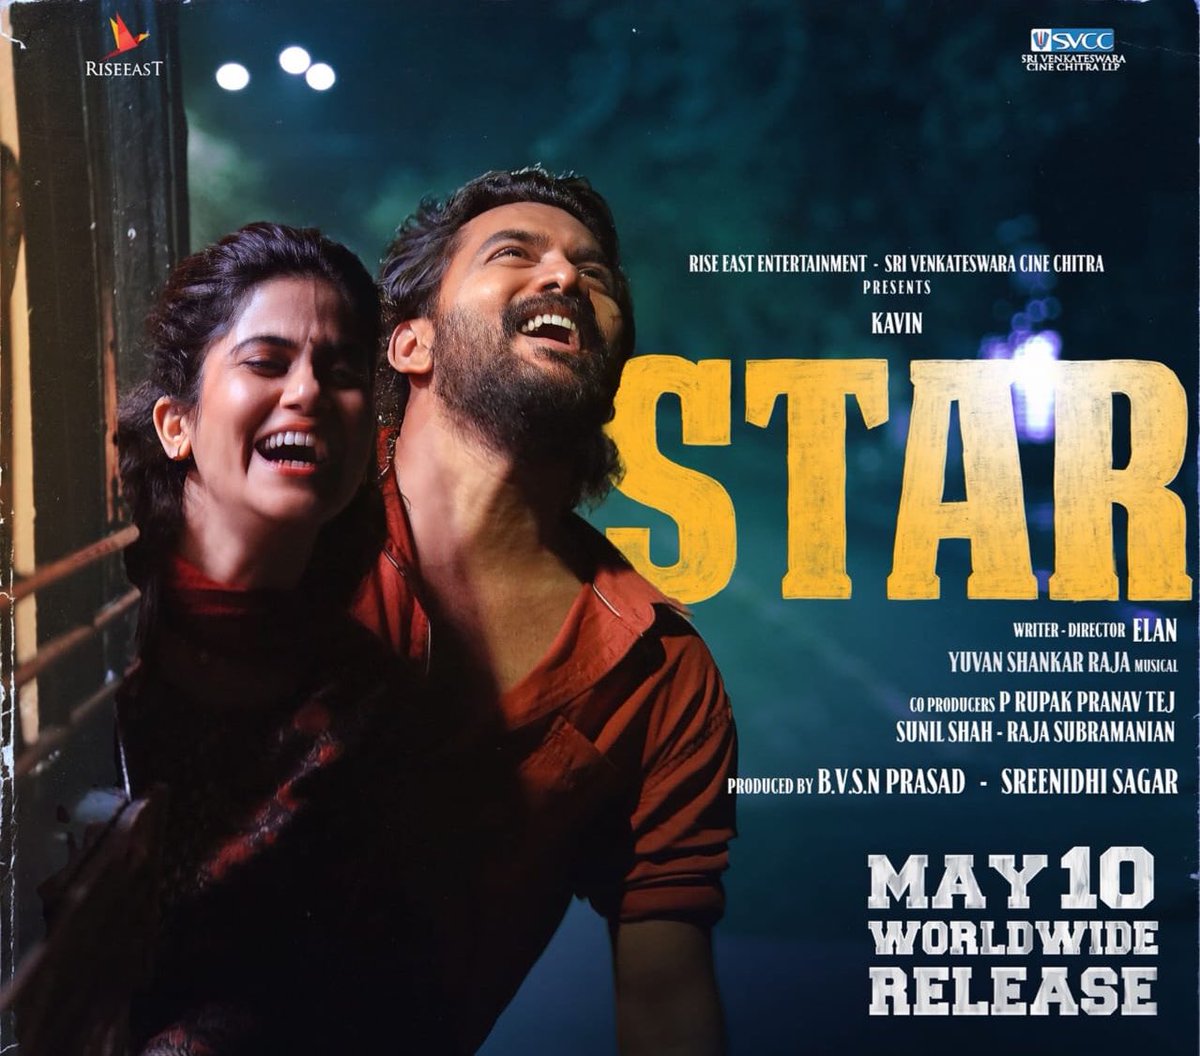 #STAR - An overwhelming response for the trailer, as it is marching towards 3M+ Views ❤️ ICYMI ▶️ youtu.be/5QlTZEogGrE #STARfromMay10 #KAVIN #ELAN